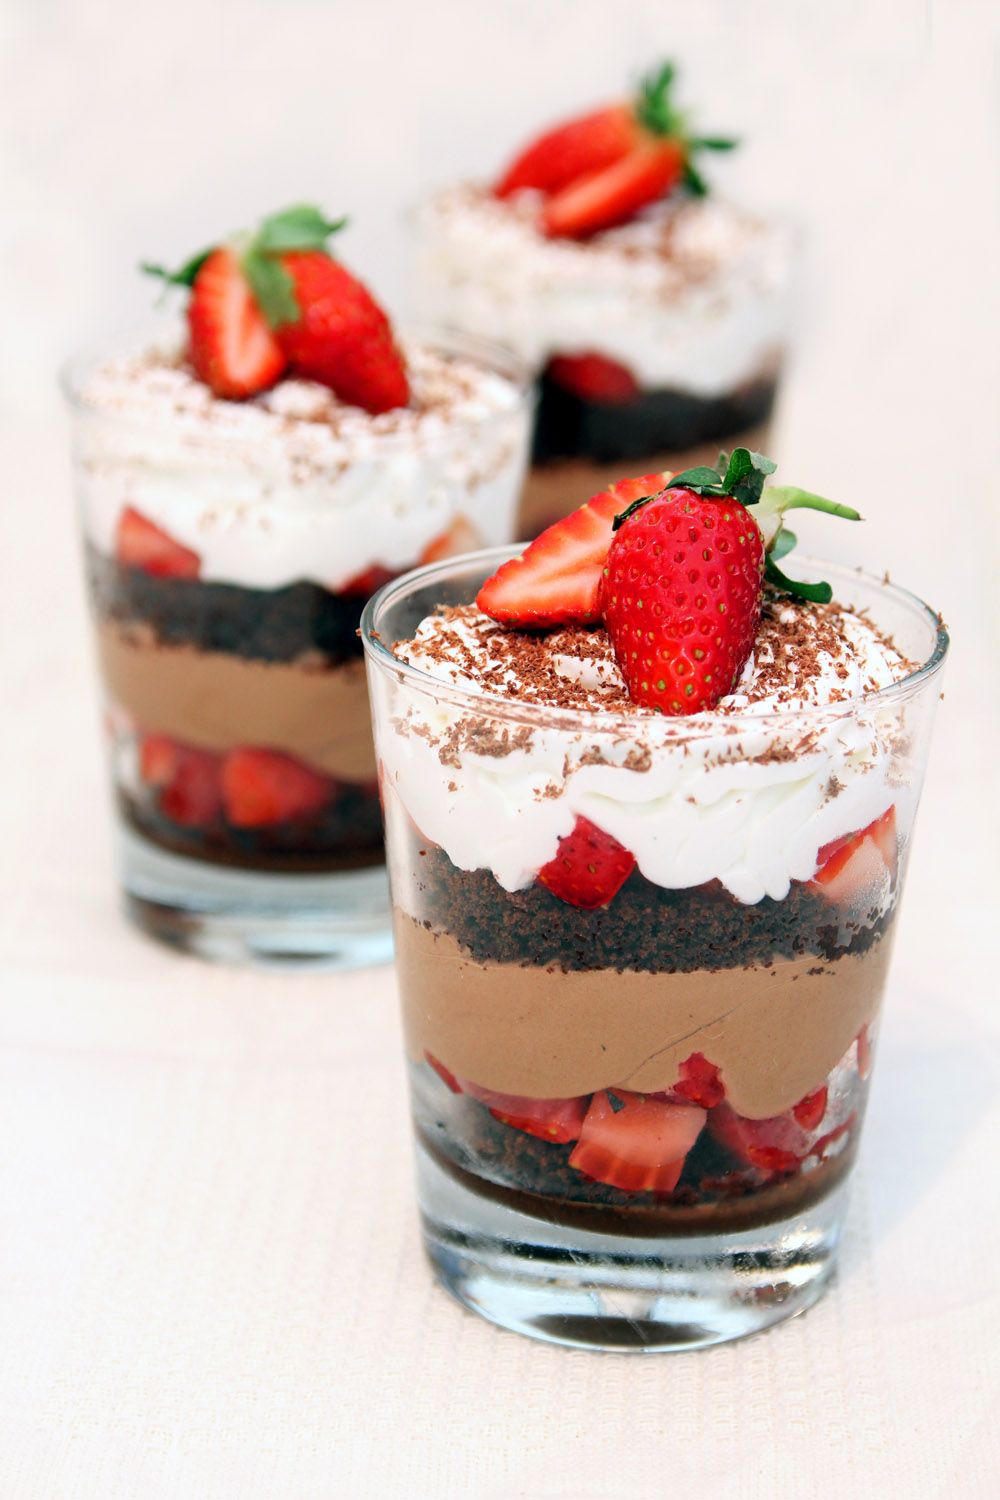 Chocolate Trifle with Strawberry and Cream | Lil' Cookie